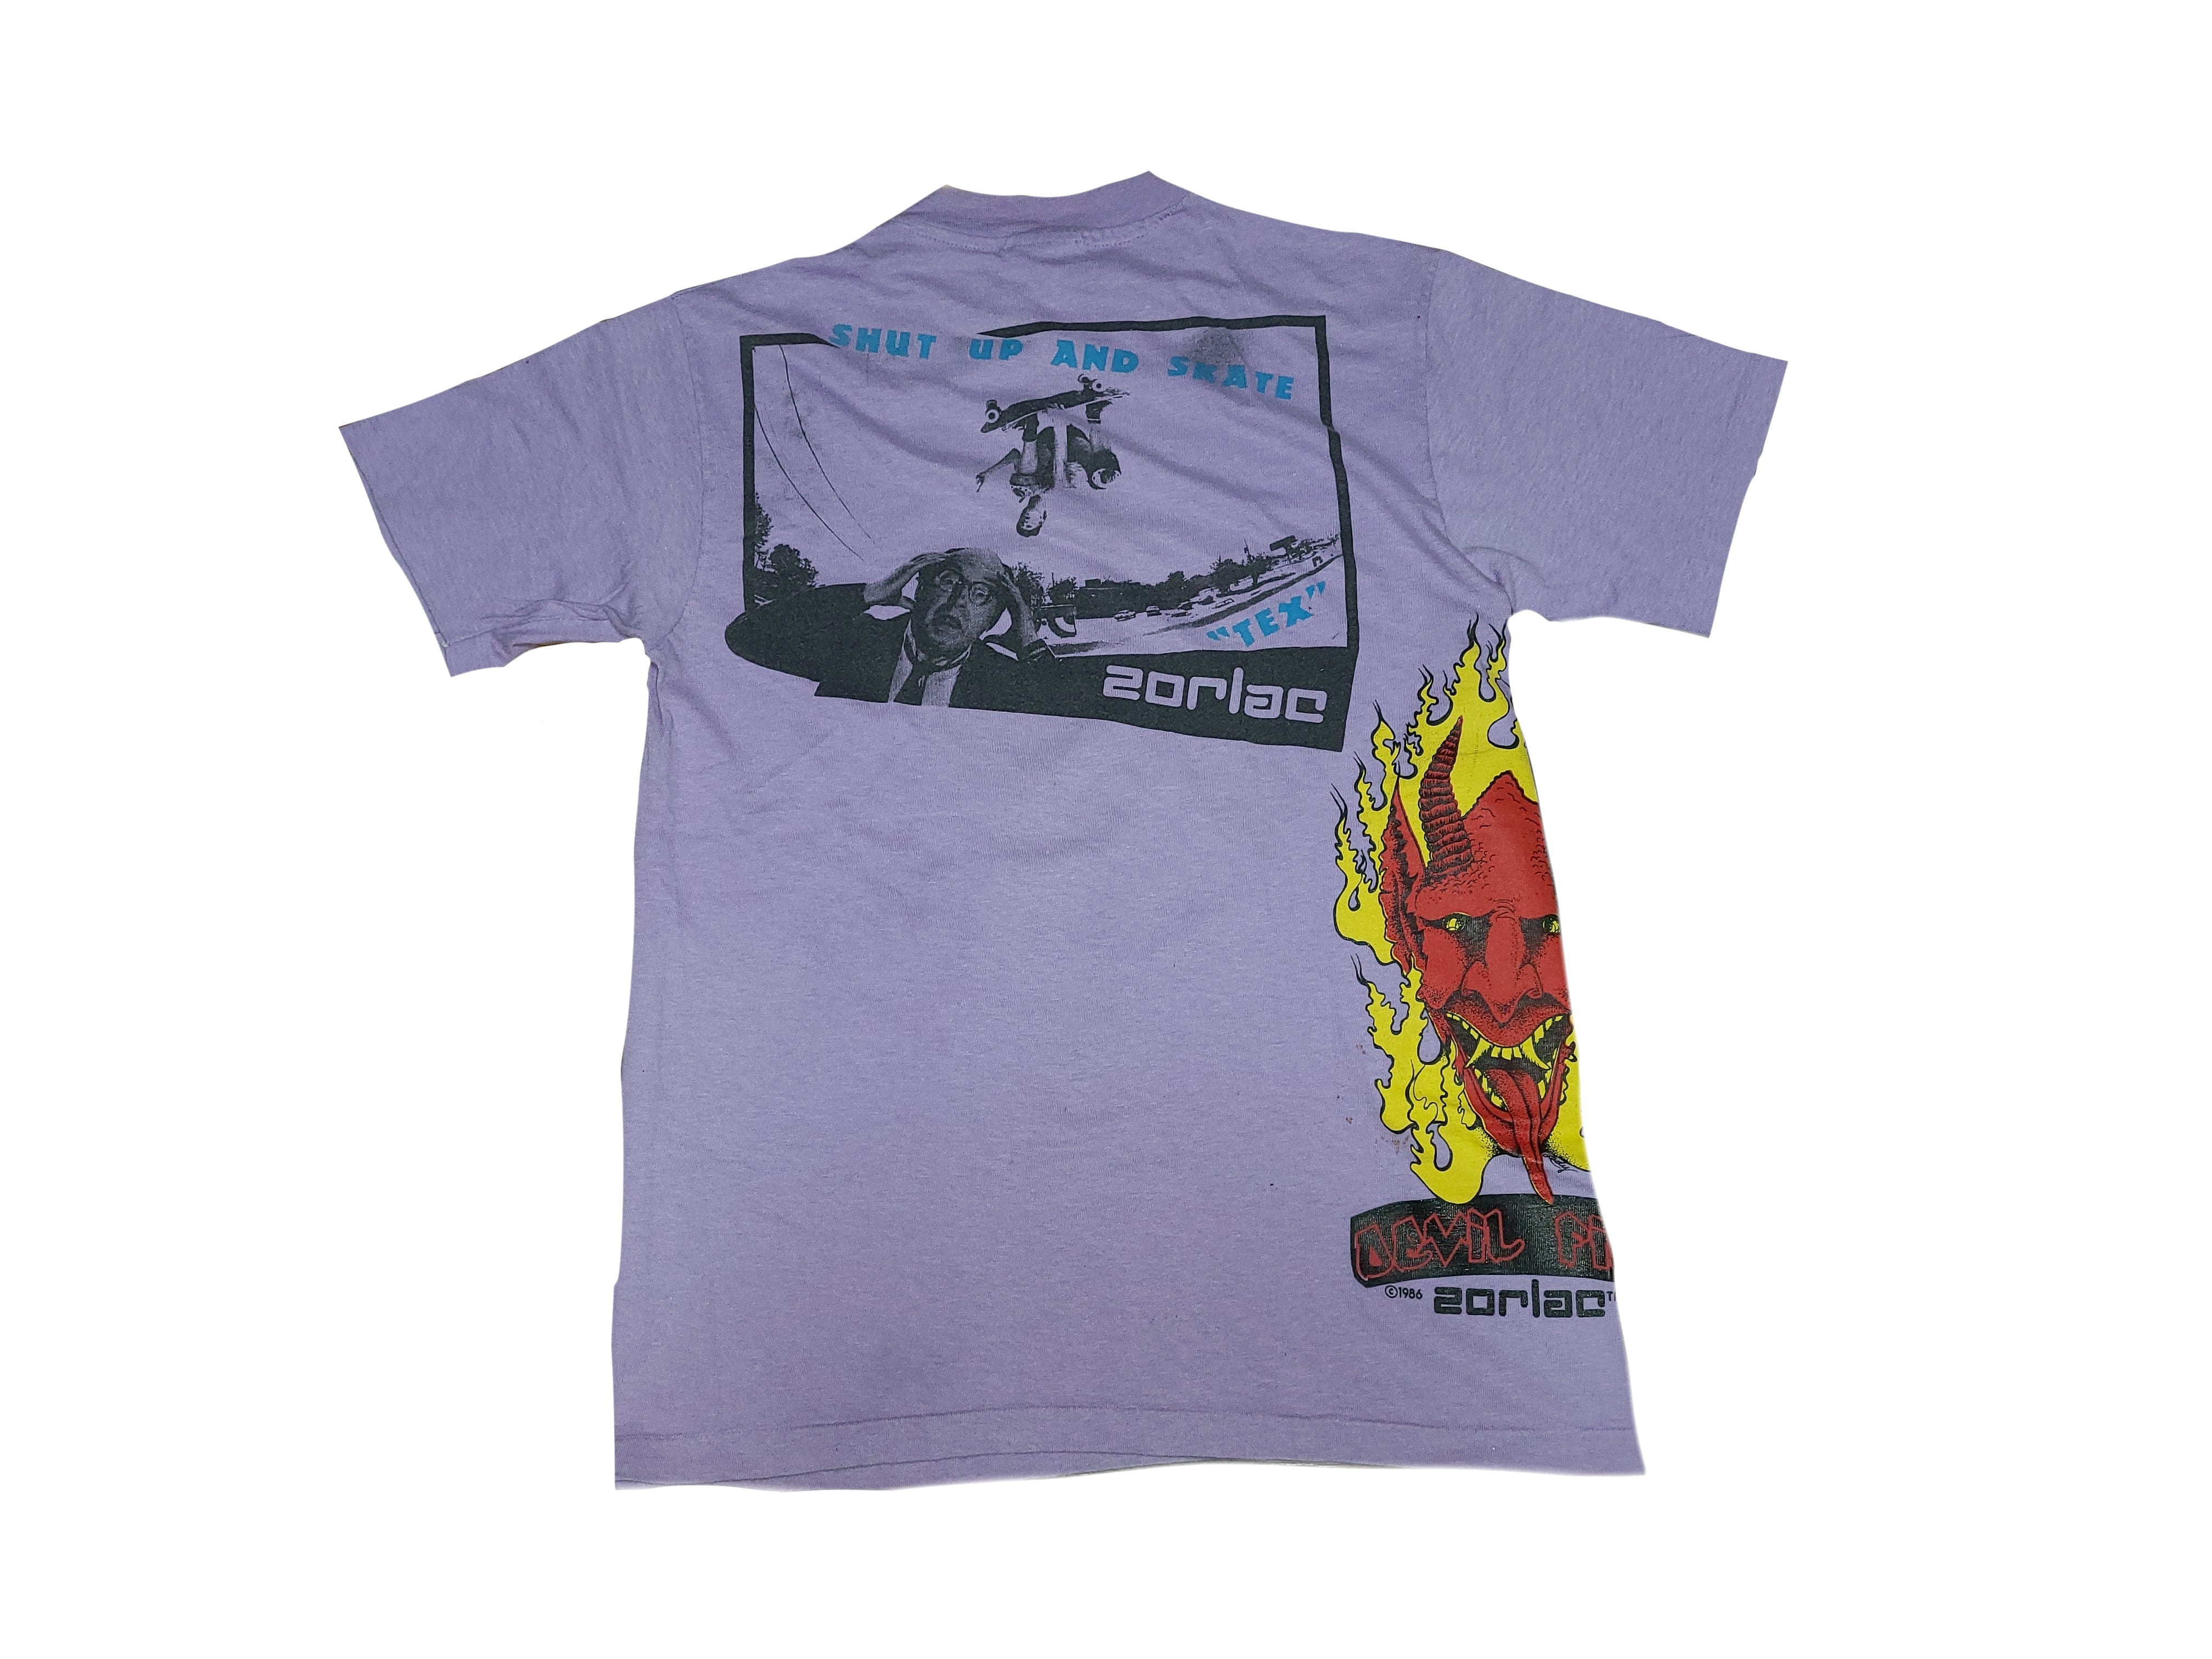 80s USA製 Zorlac Skateboards Tシャツ スケートボード ヴィンテージ ...